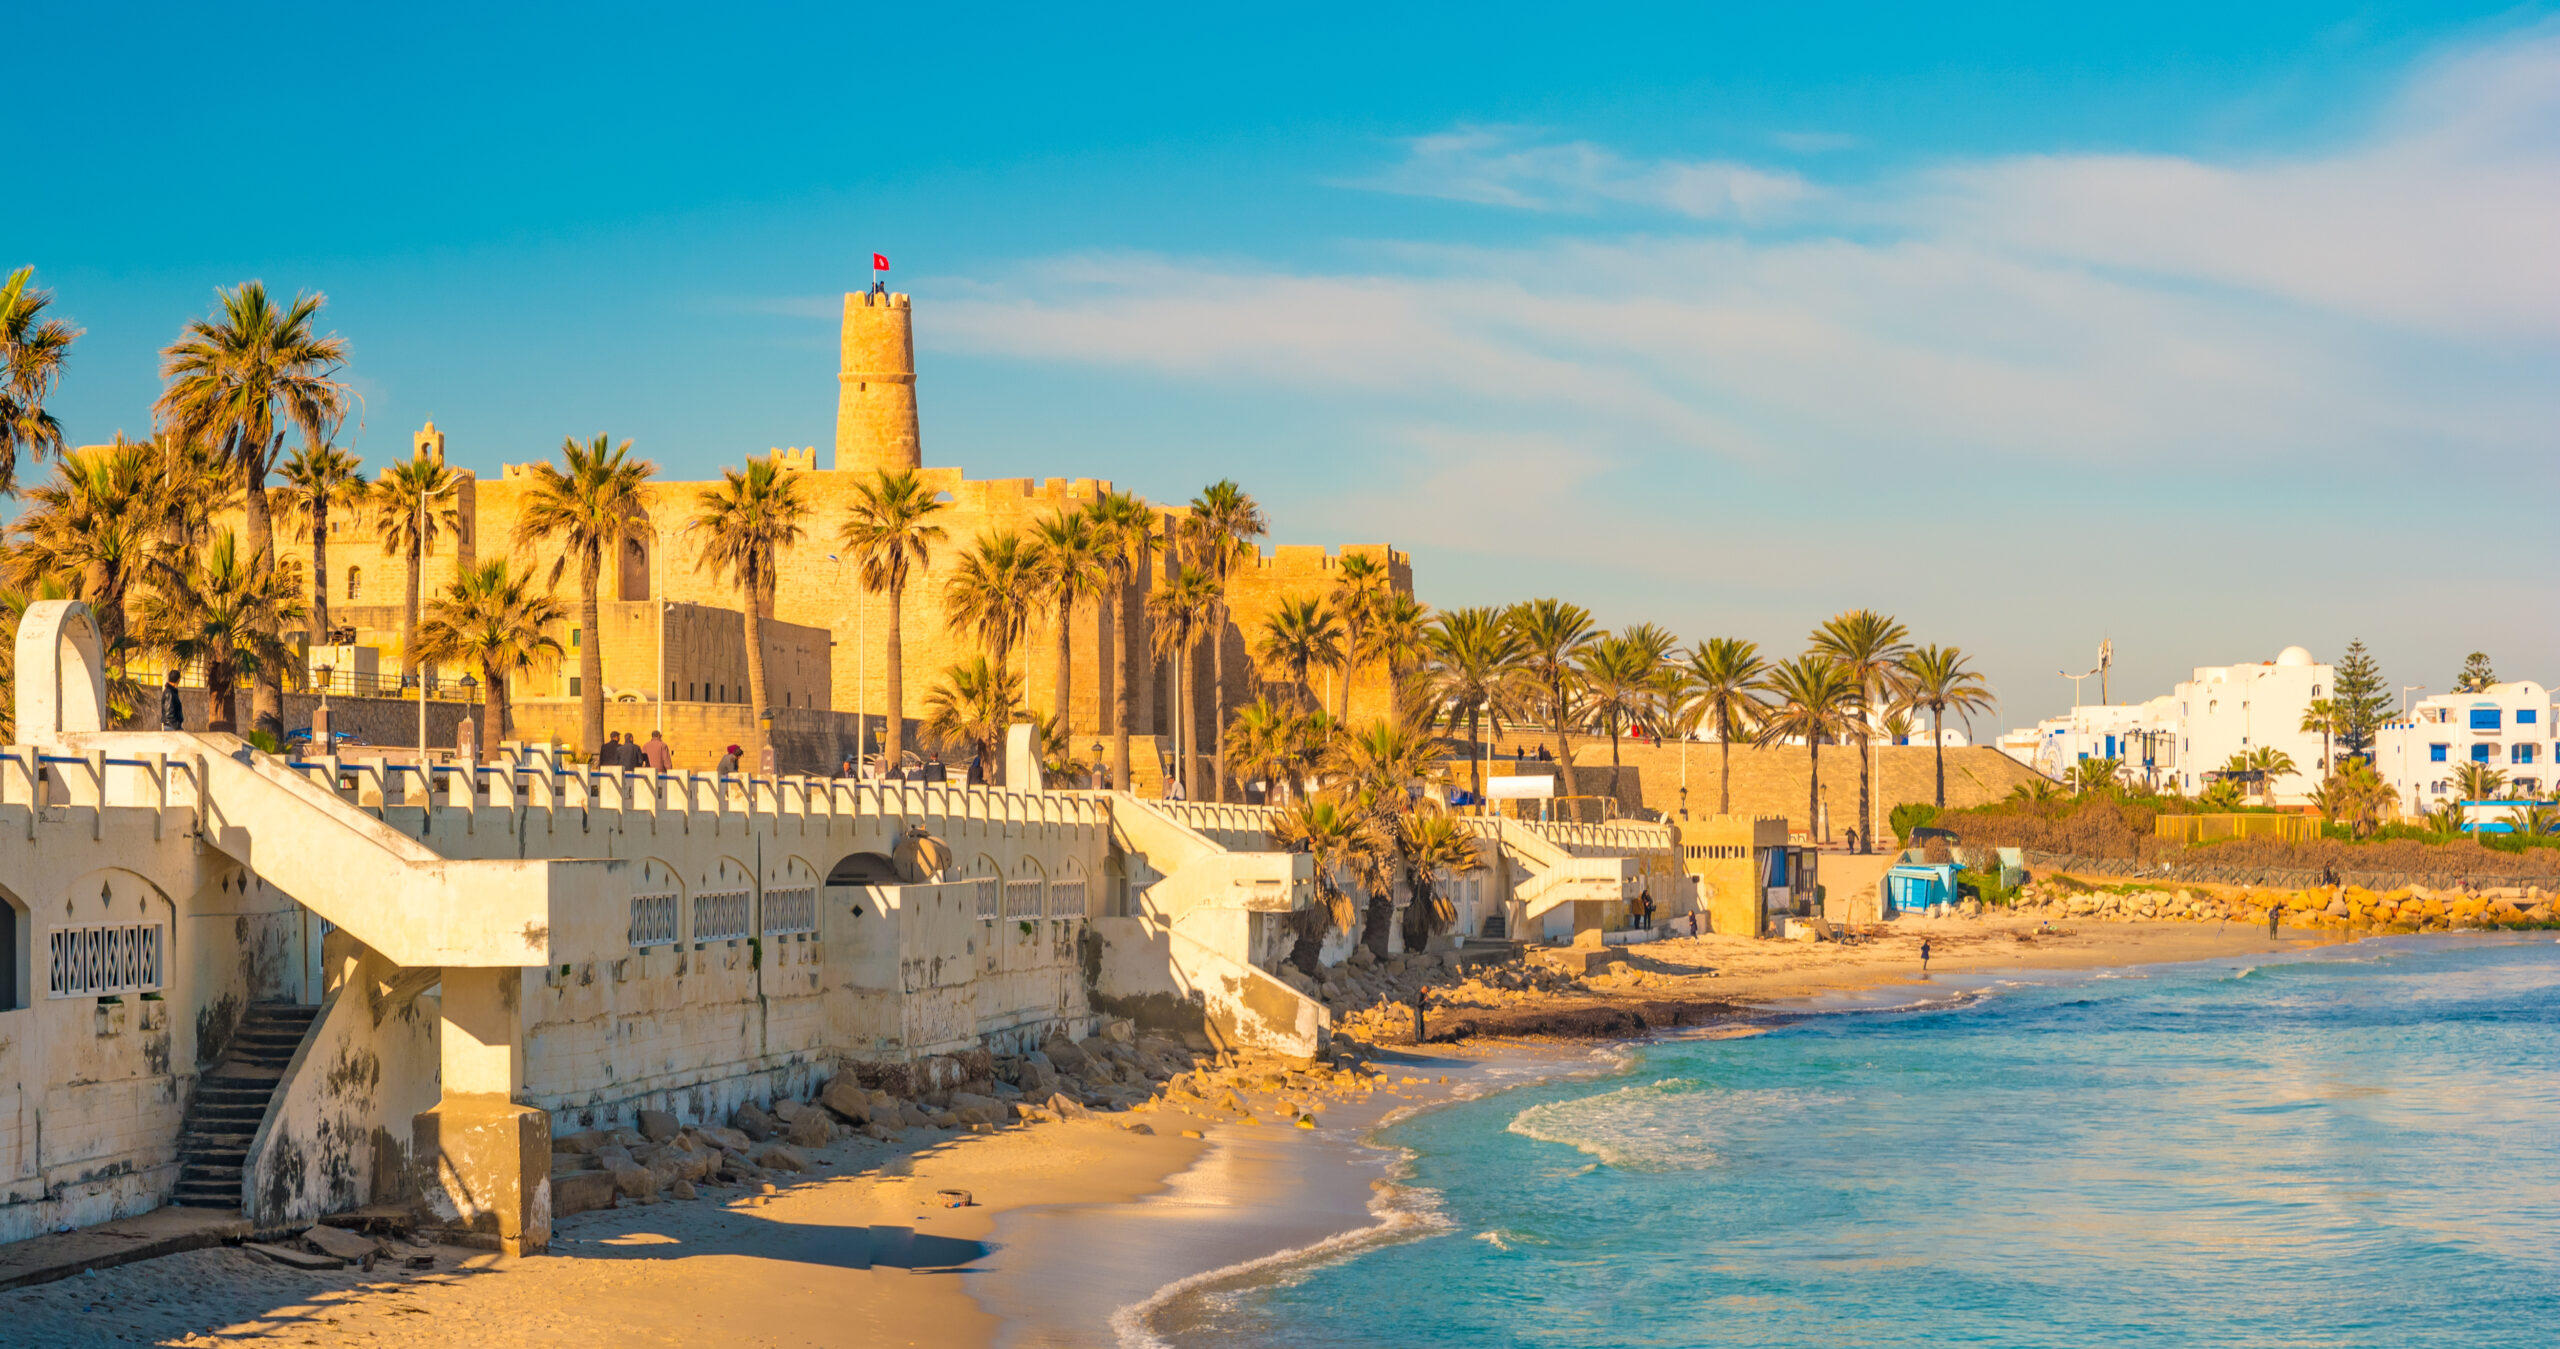 Do you feel like travelling to an Arab country in Africa? Click here to find out why Tunisia should be your next destination.